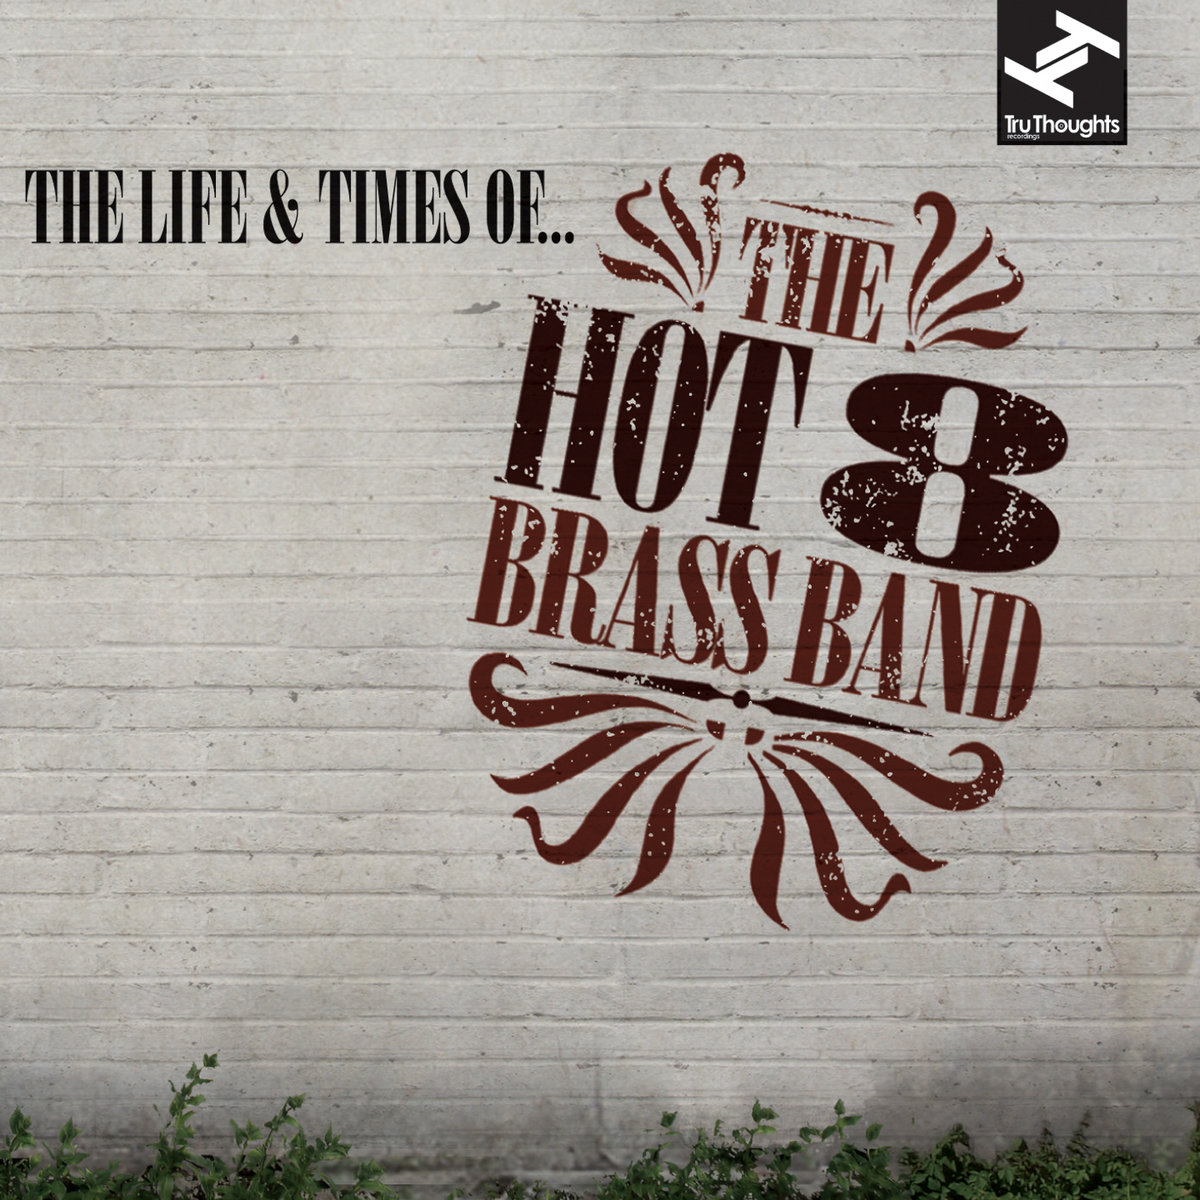 The Hot 8 Brass Band - The Life & Times of (2012) FLAC Download